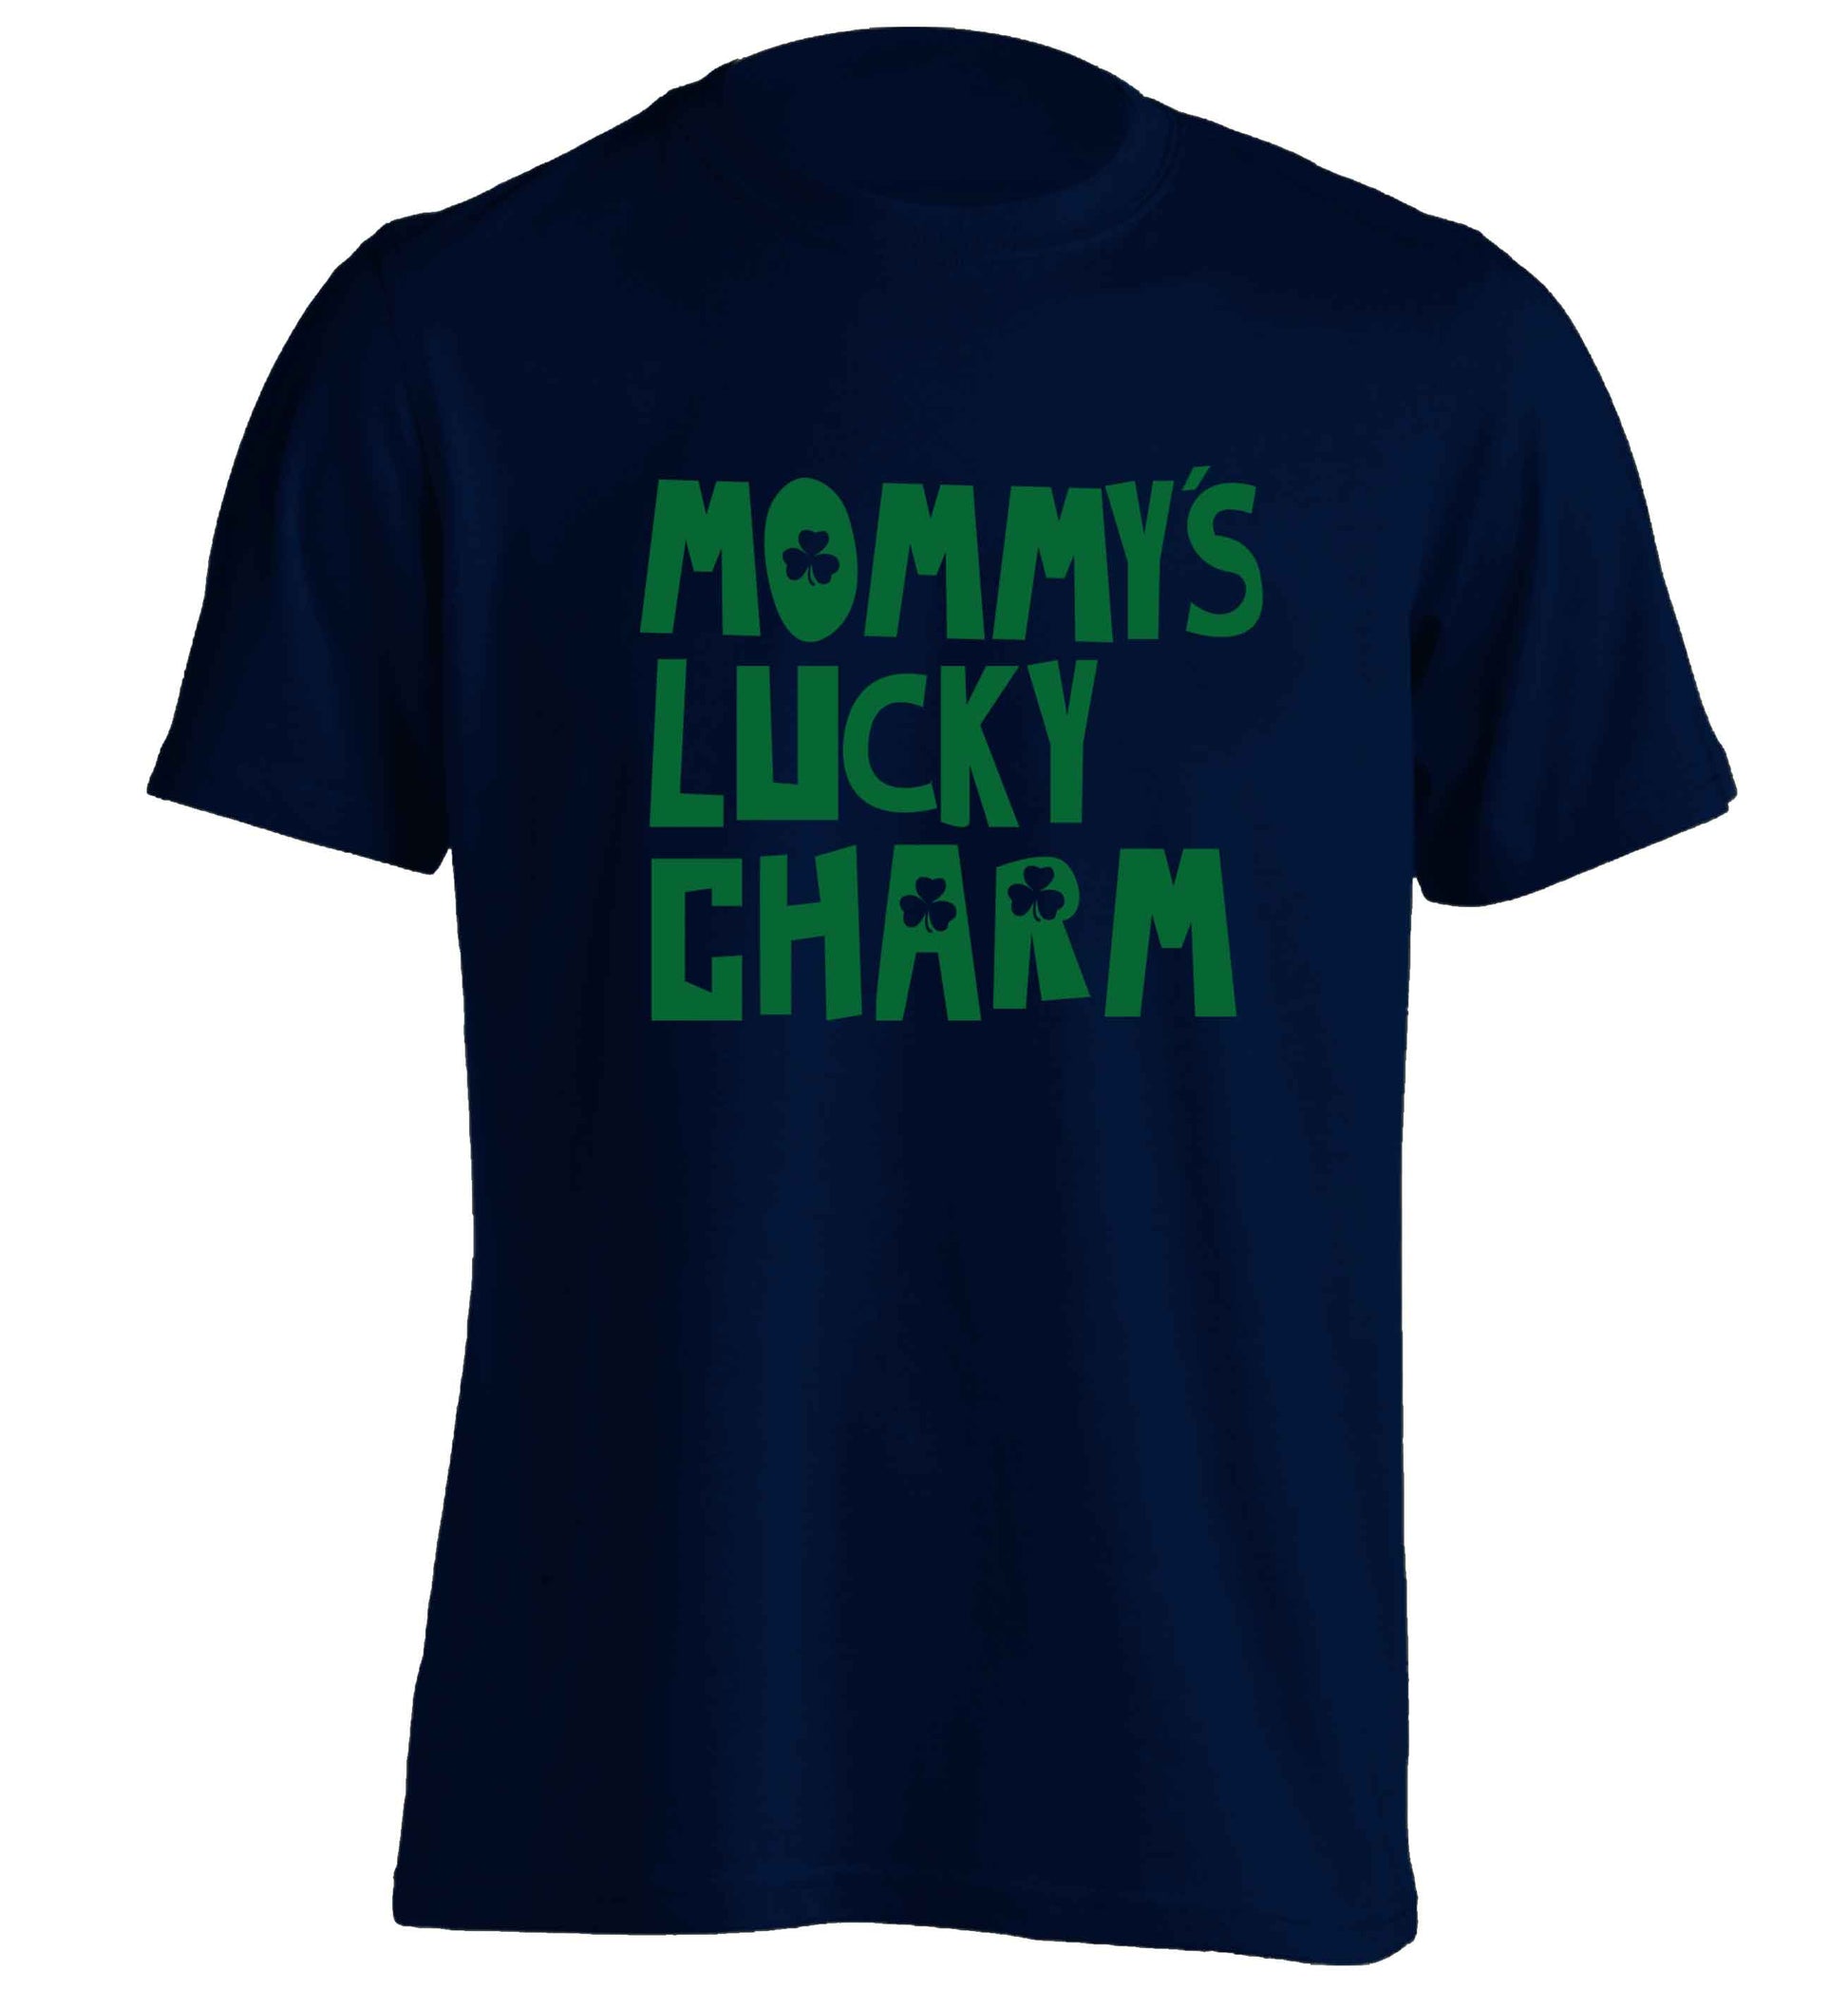 Mommy's lucky charm adults unisex navy Tshirt 2XL